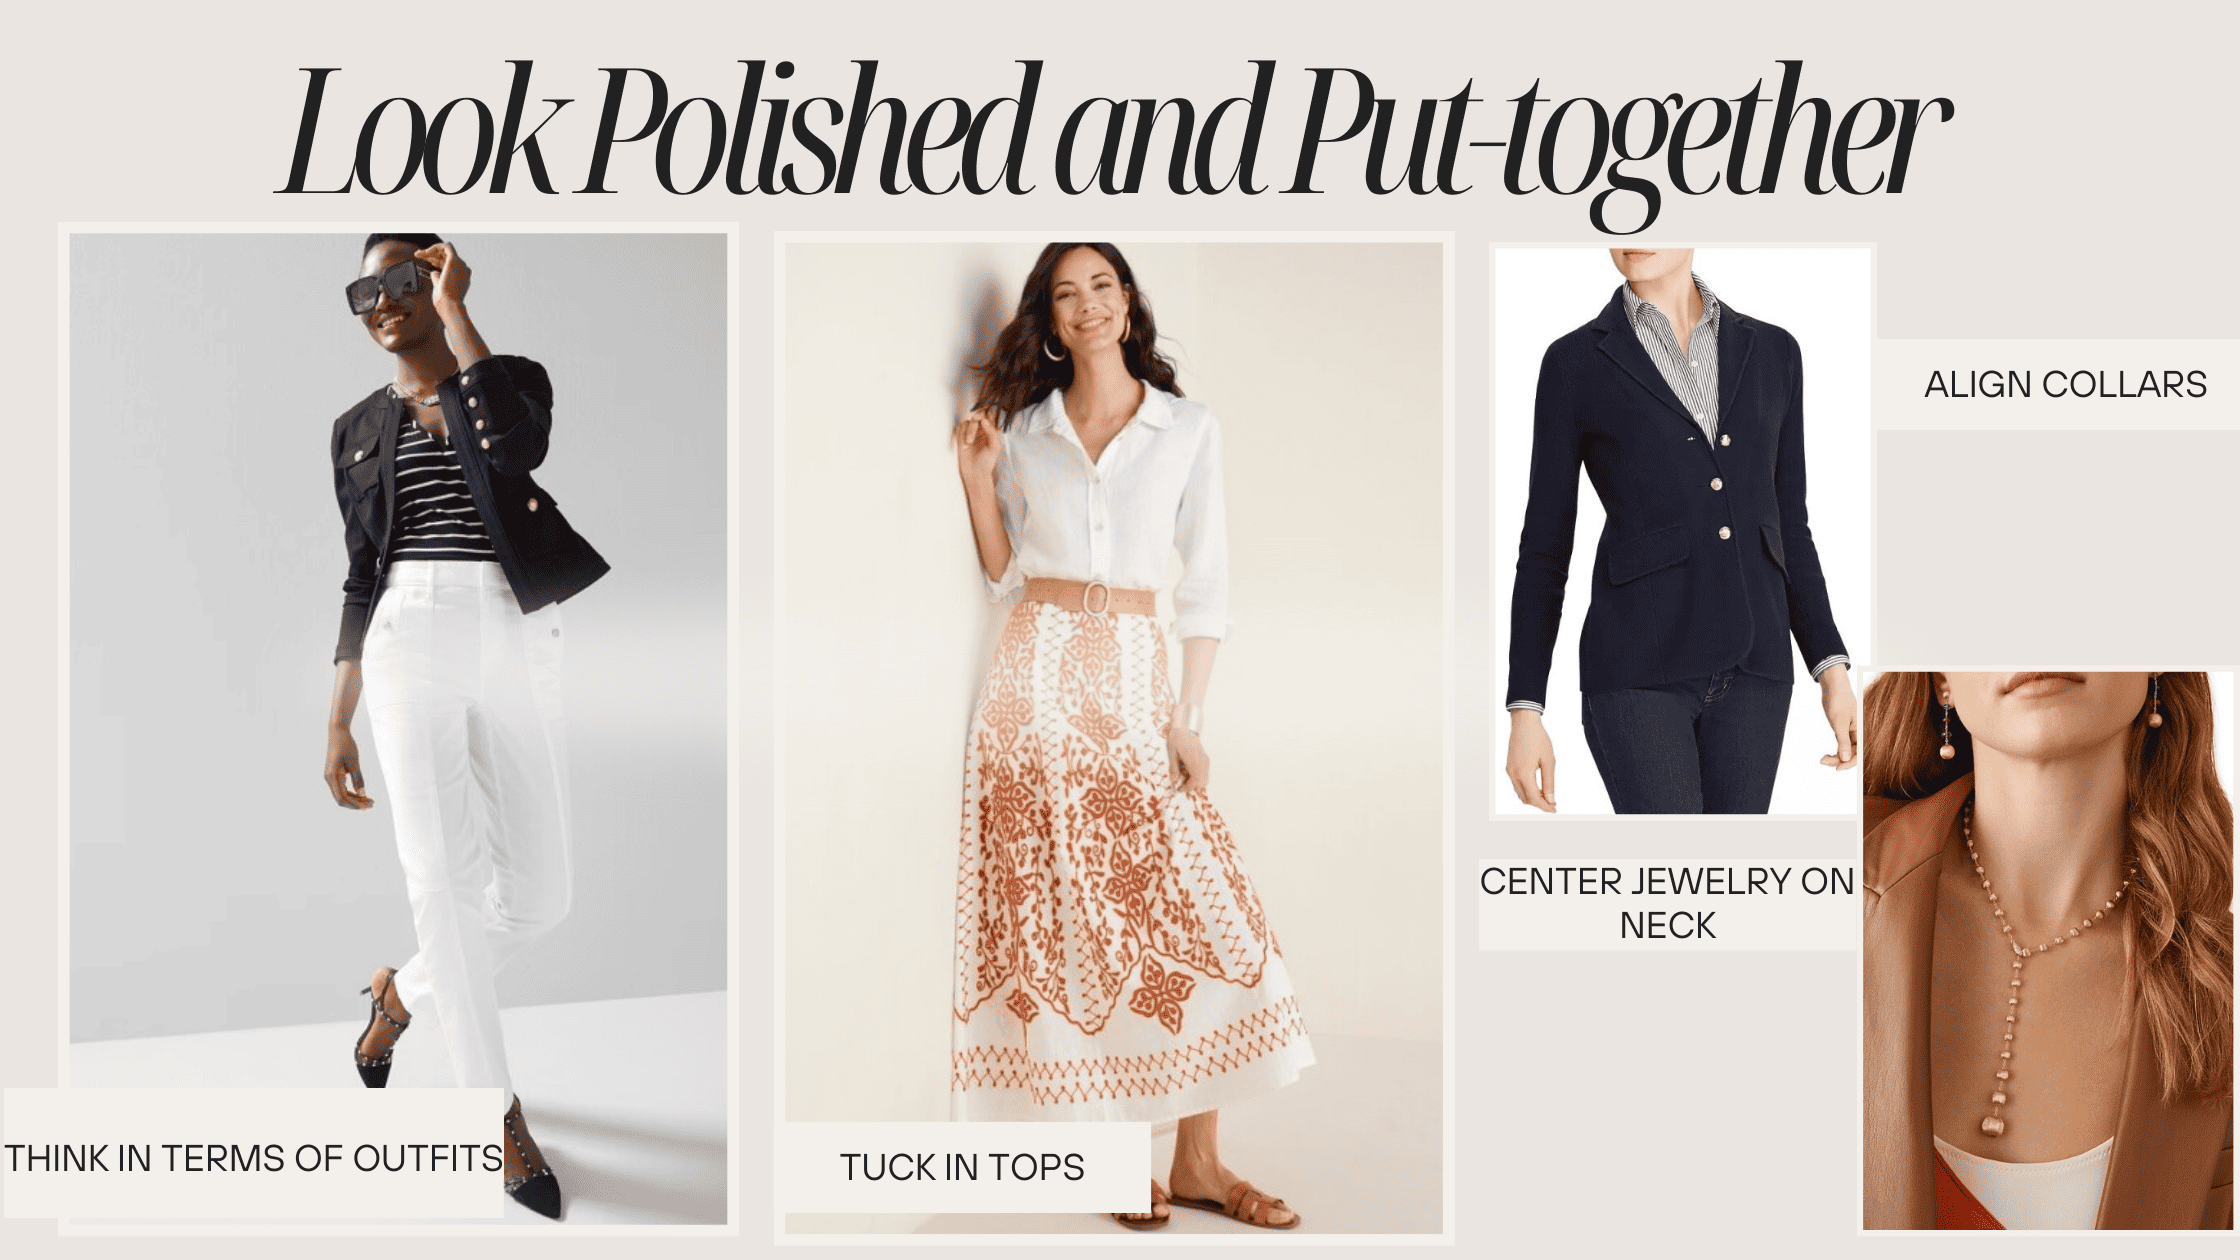 Look Polished and Put-together